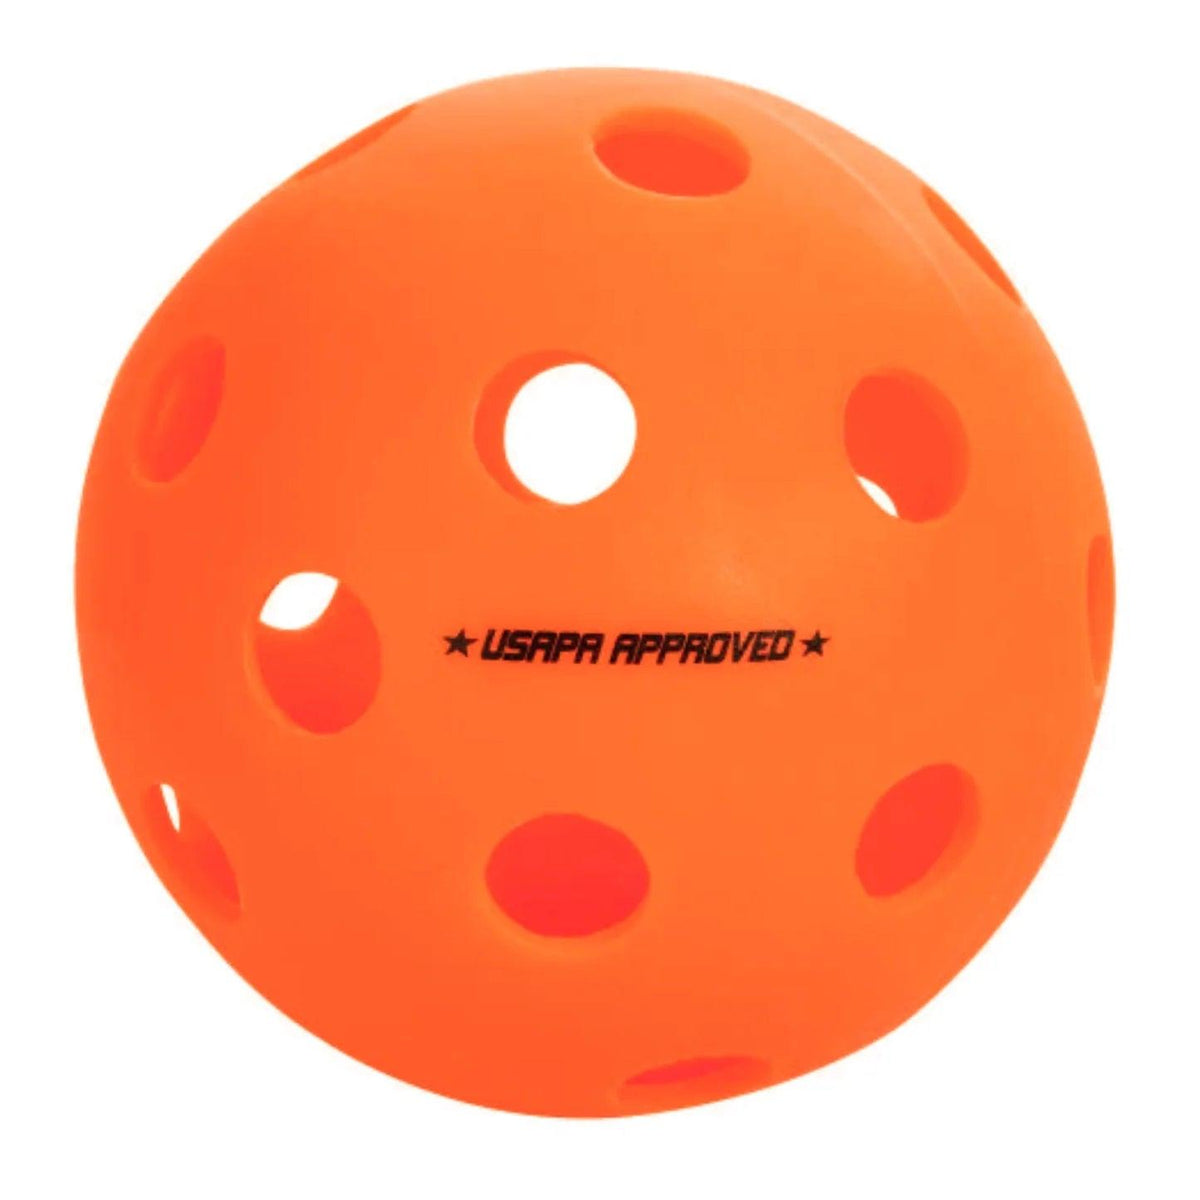 ONIX FUSE INDOOR BALL UNIT - Marcotte Sports Inc